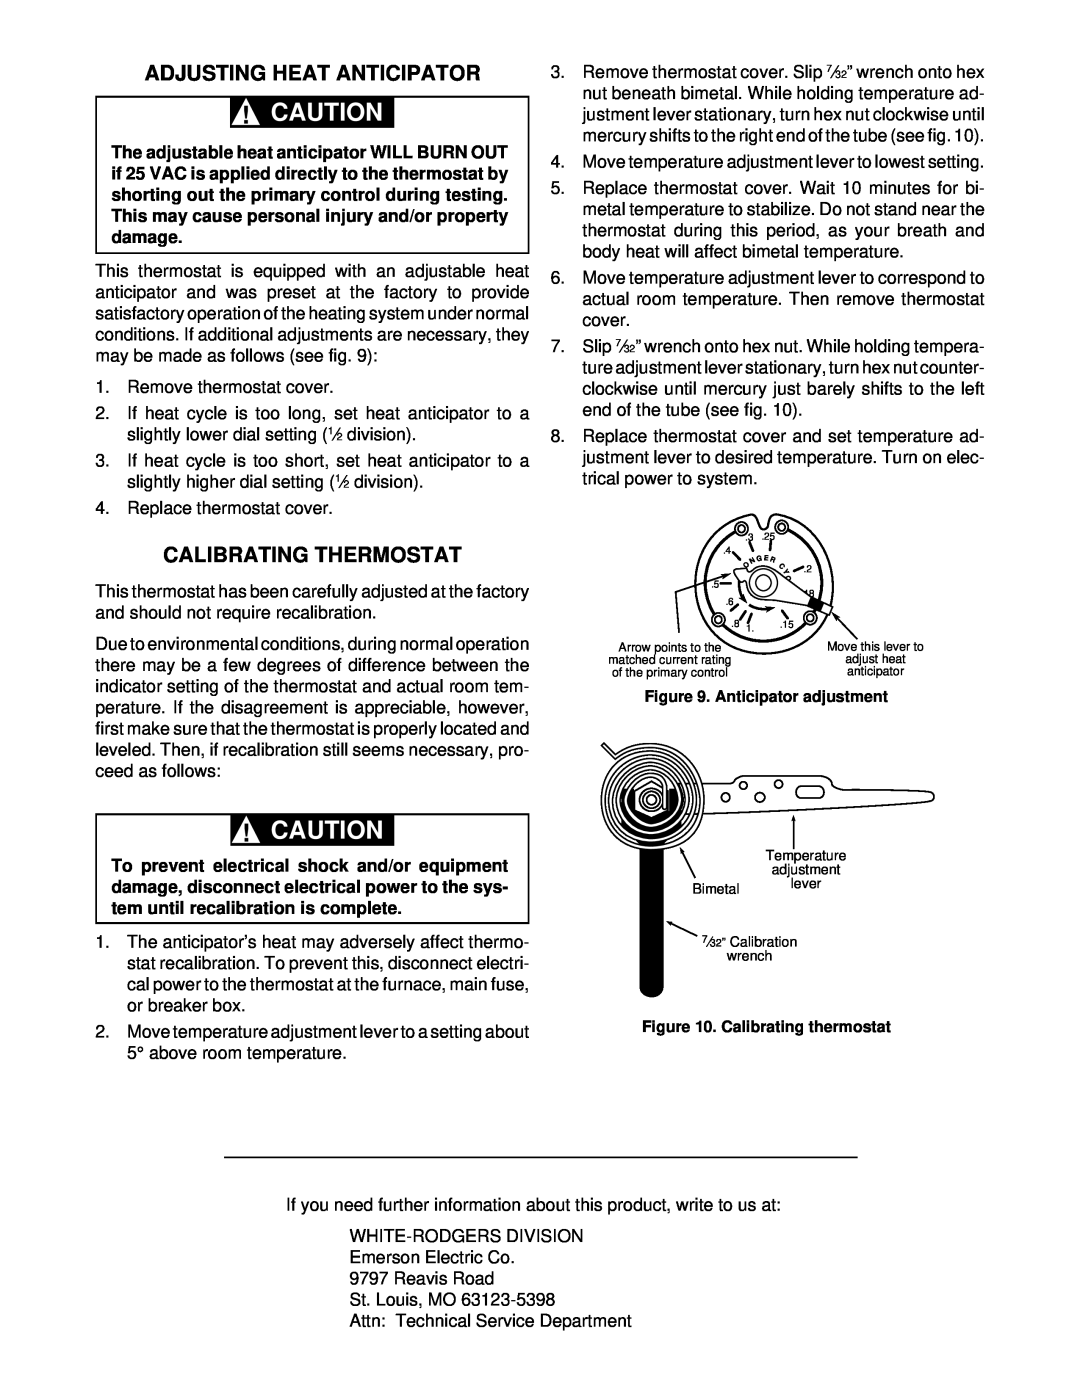 White Rodgers 1F56W-444 installation instructions Adjusting Heat Anticipator, Calibrating Thermostat 